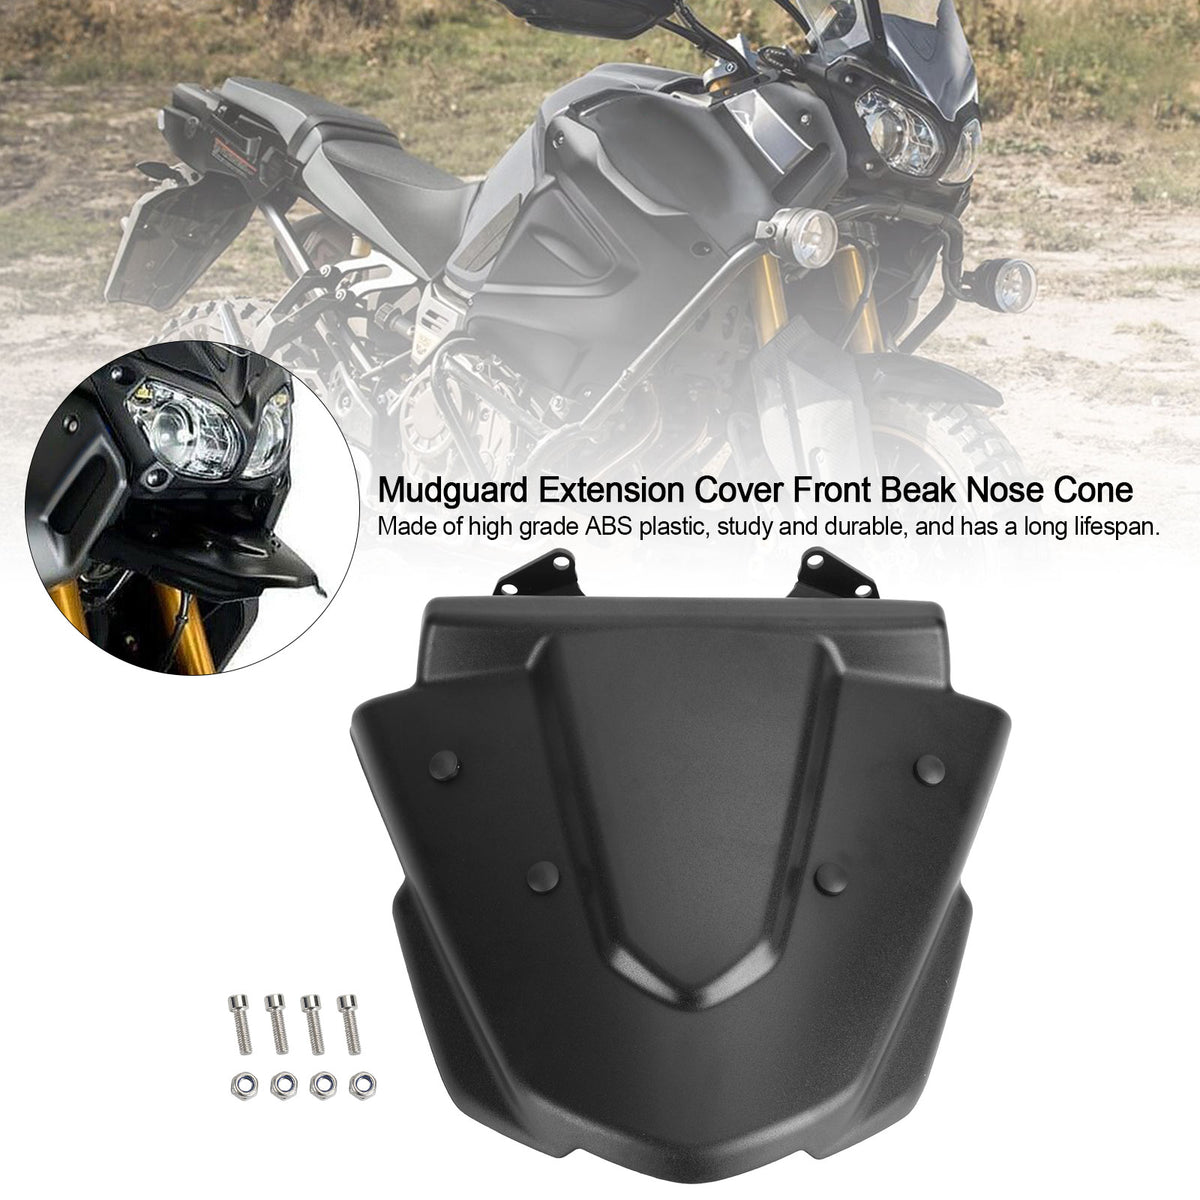 Mudguard Extension Cover Front Beak Nose Cone for Yamaha XT1200Z 2014-2021 Generic